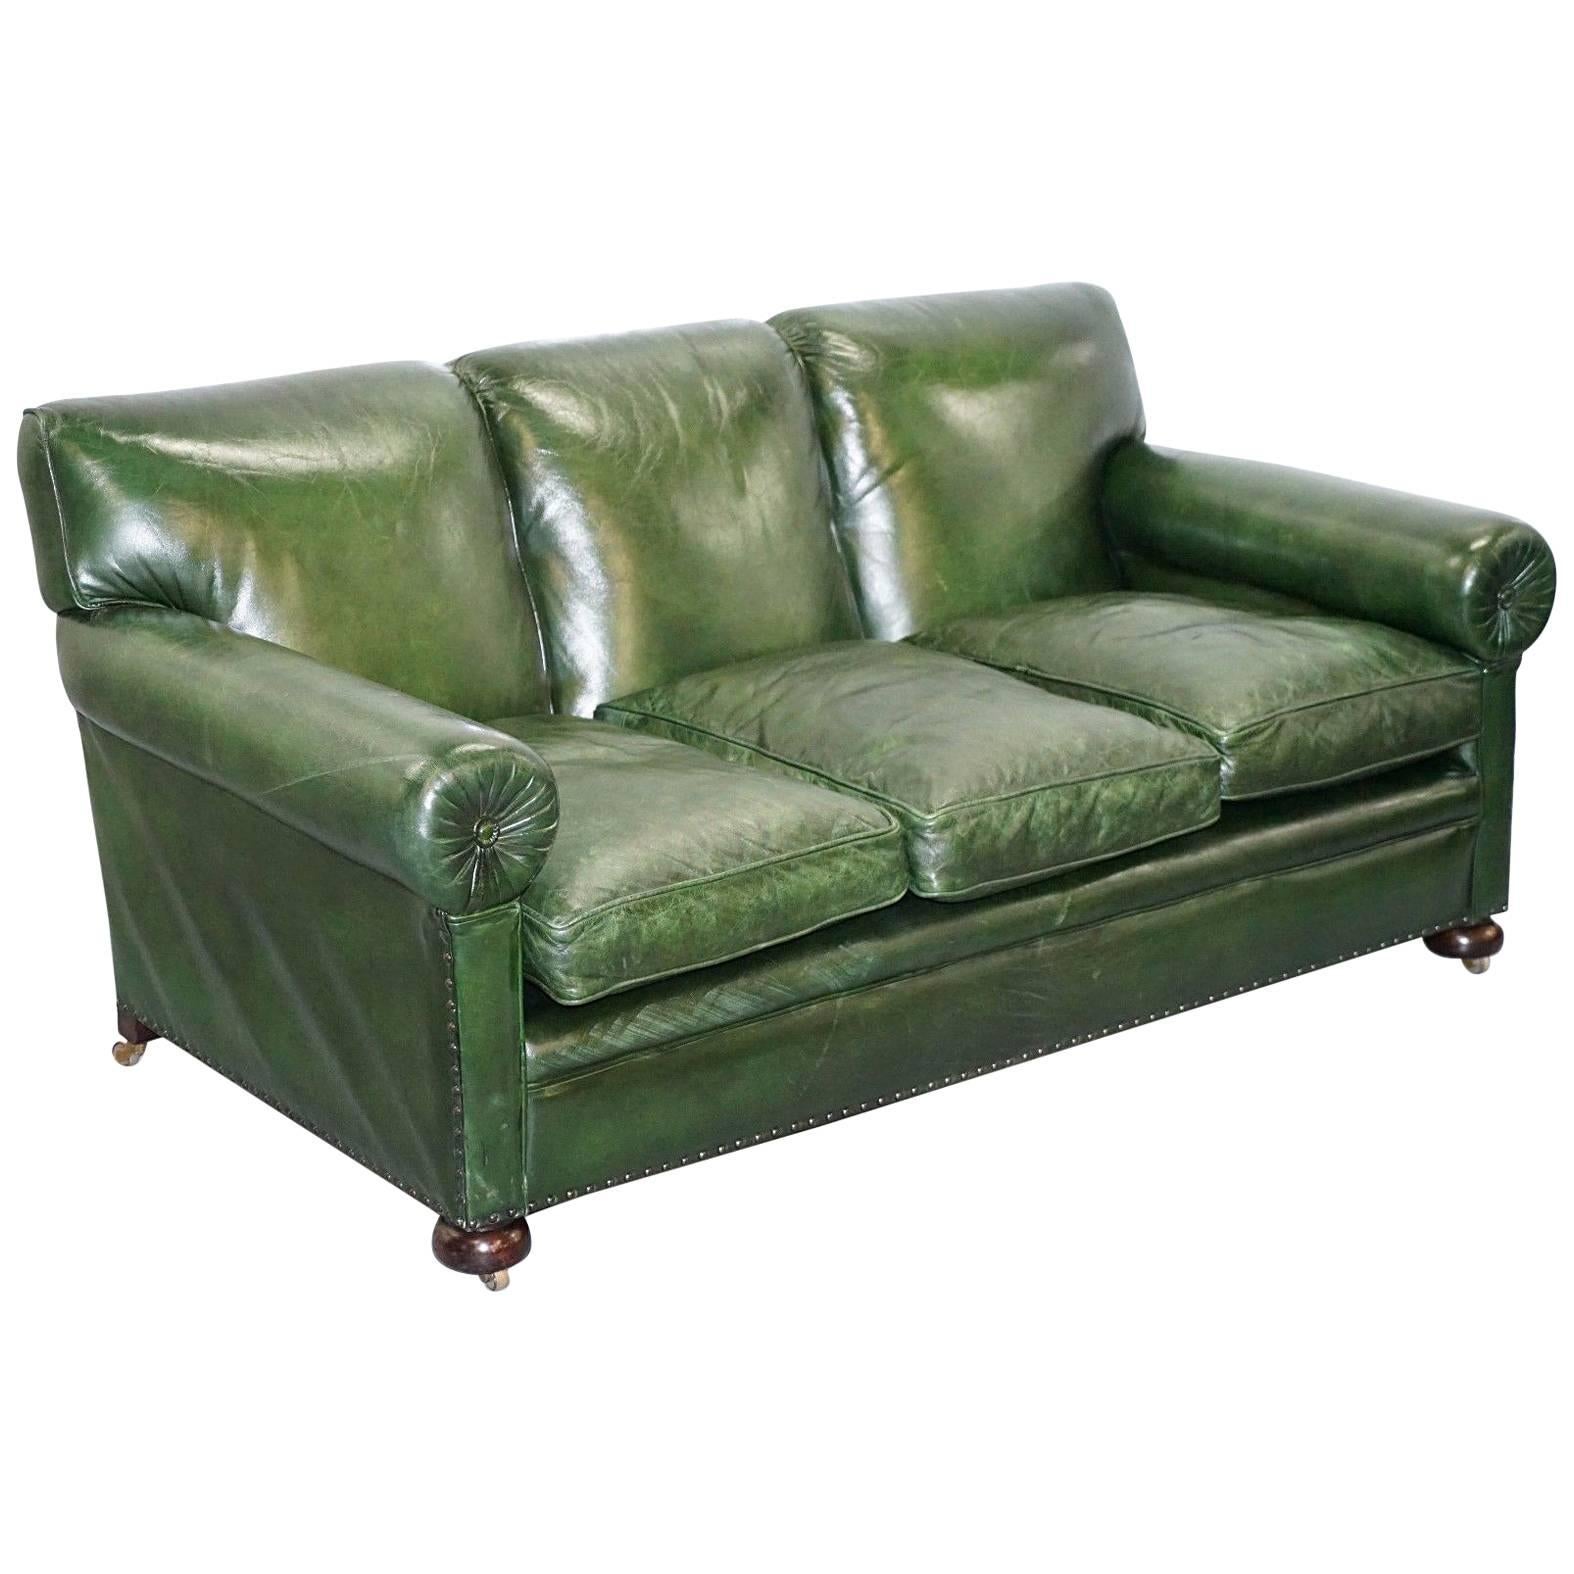 Stunning Victorian Green Leather Maple & Co the Hever Three-Seat Club Sofa